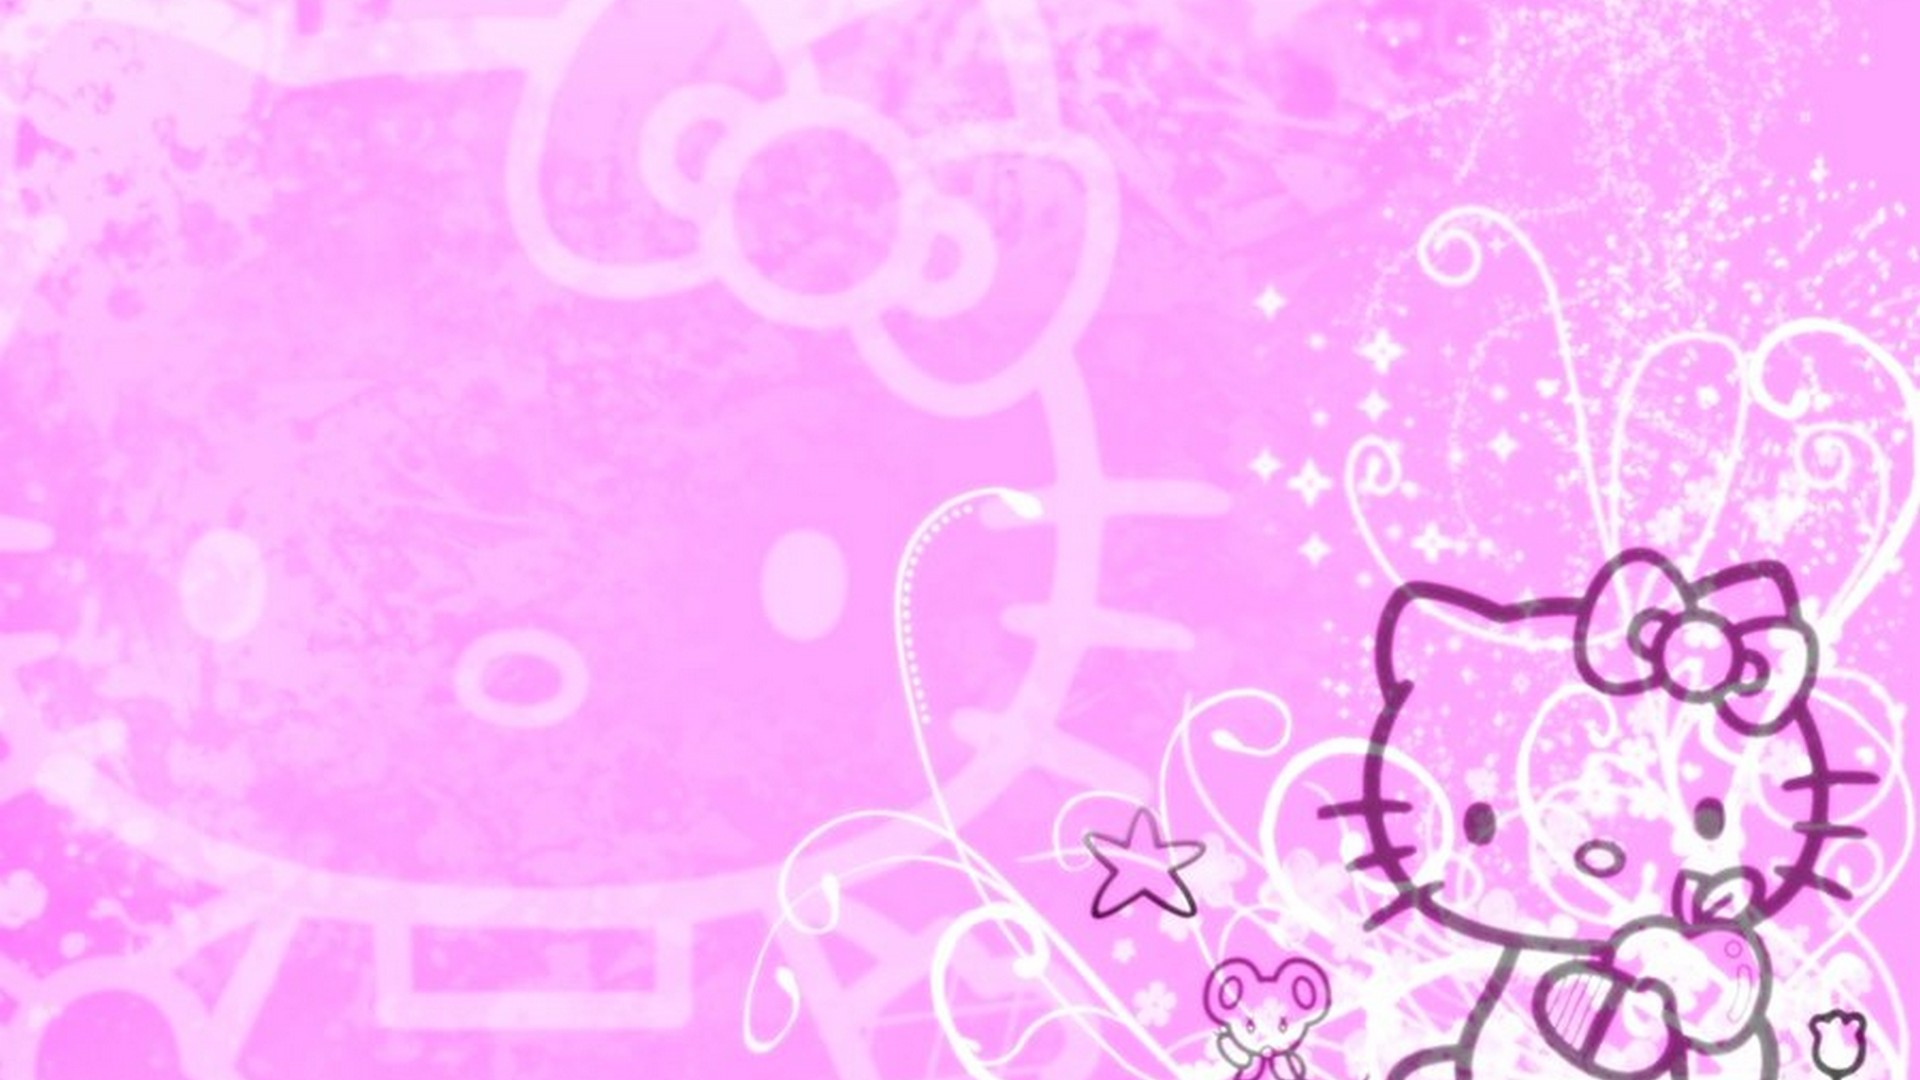 Hello Kitty Images Desktop Backgrounds With Resolution 1920X1080 pixel. You can make this wallpaper for your Desktop Computer Backgrounds, Mac Wallpapers, Android Lock screen or iPhone Screensavers